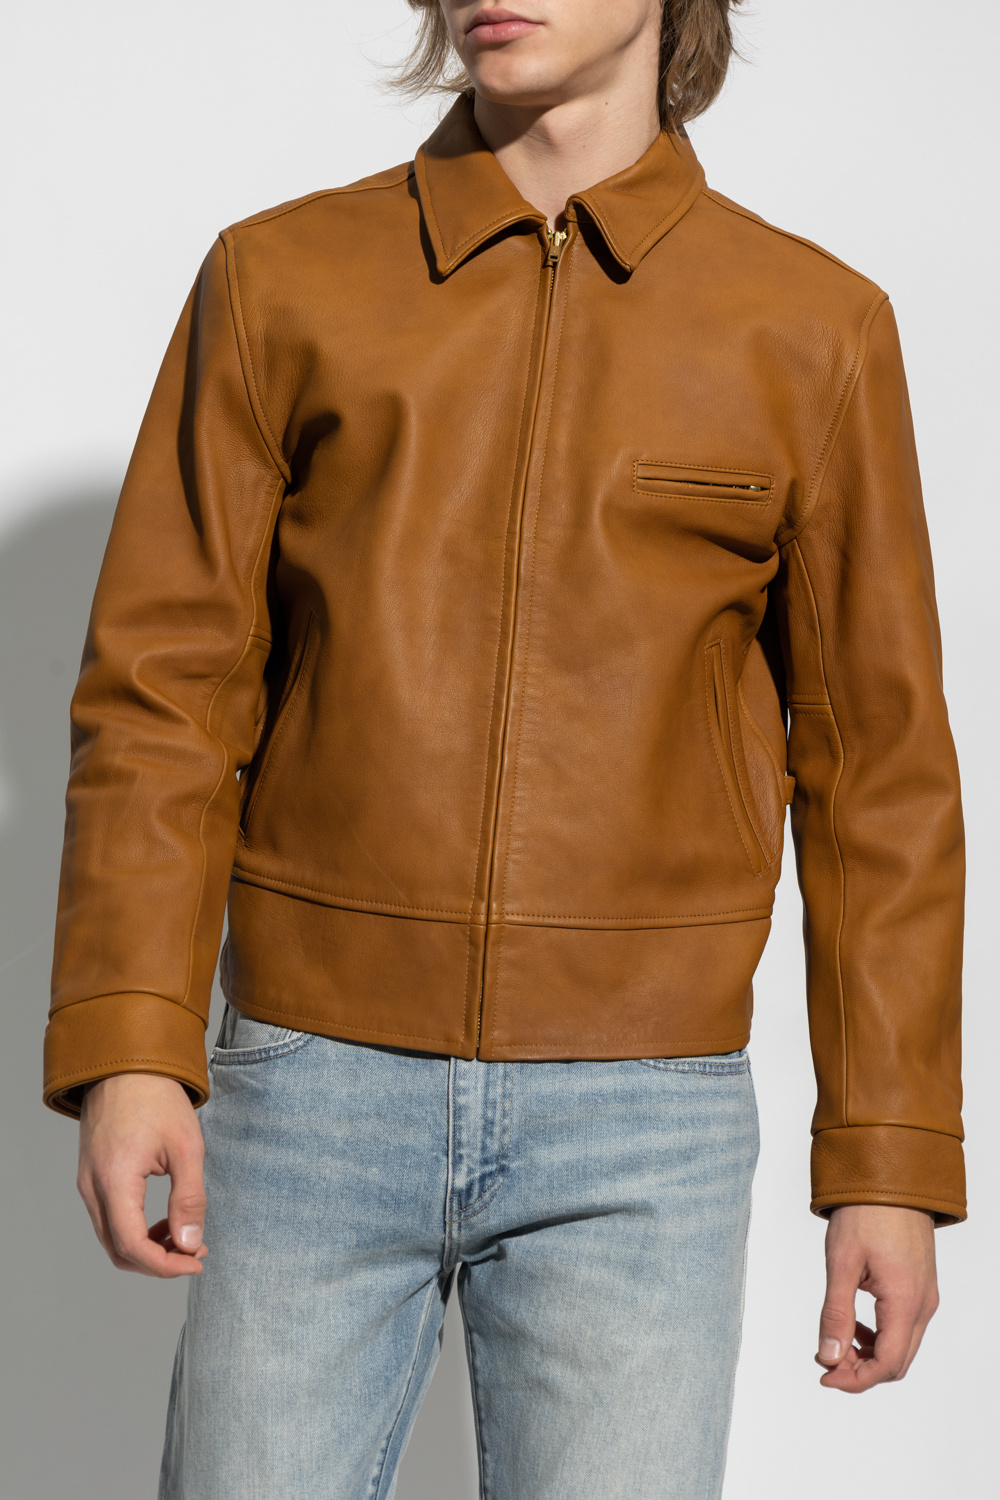 Brown Leather jacket 'Vintage Clothing®' collection Levi's - Vitkac TW